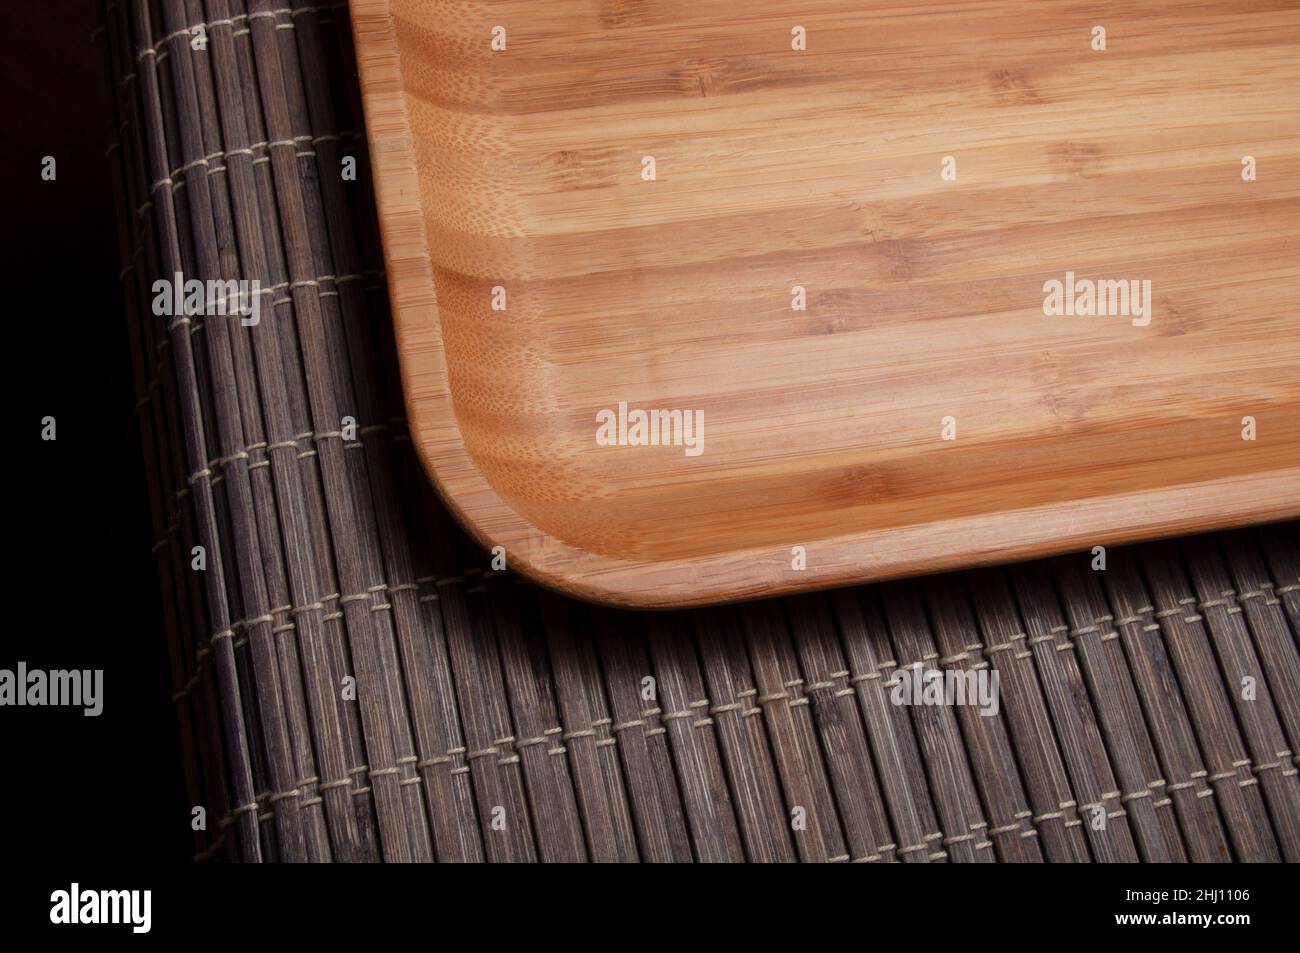 empty wooden dish without food natural Stock Photo